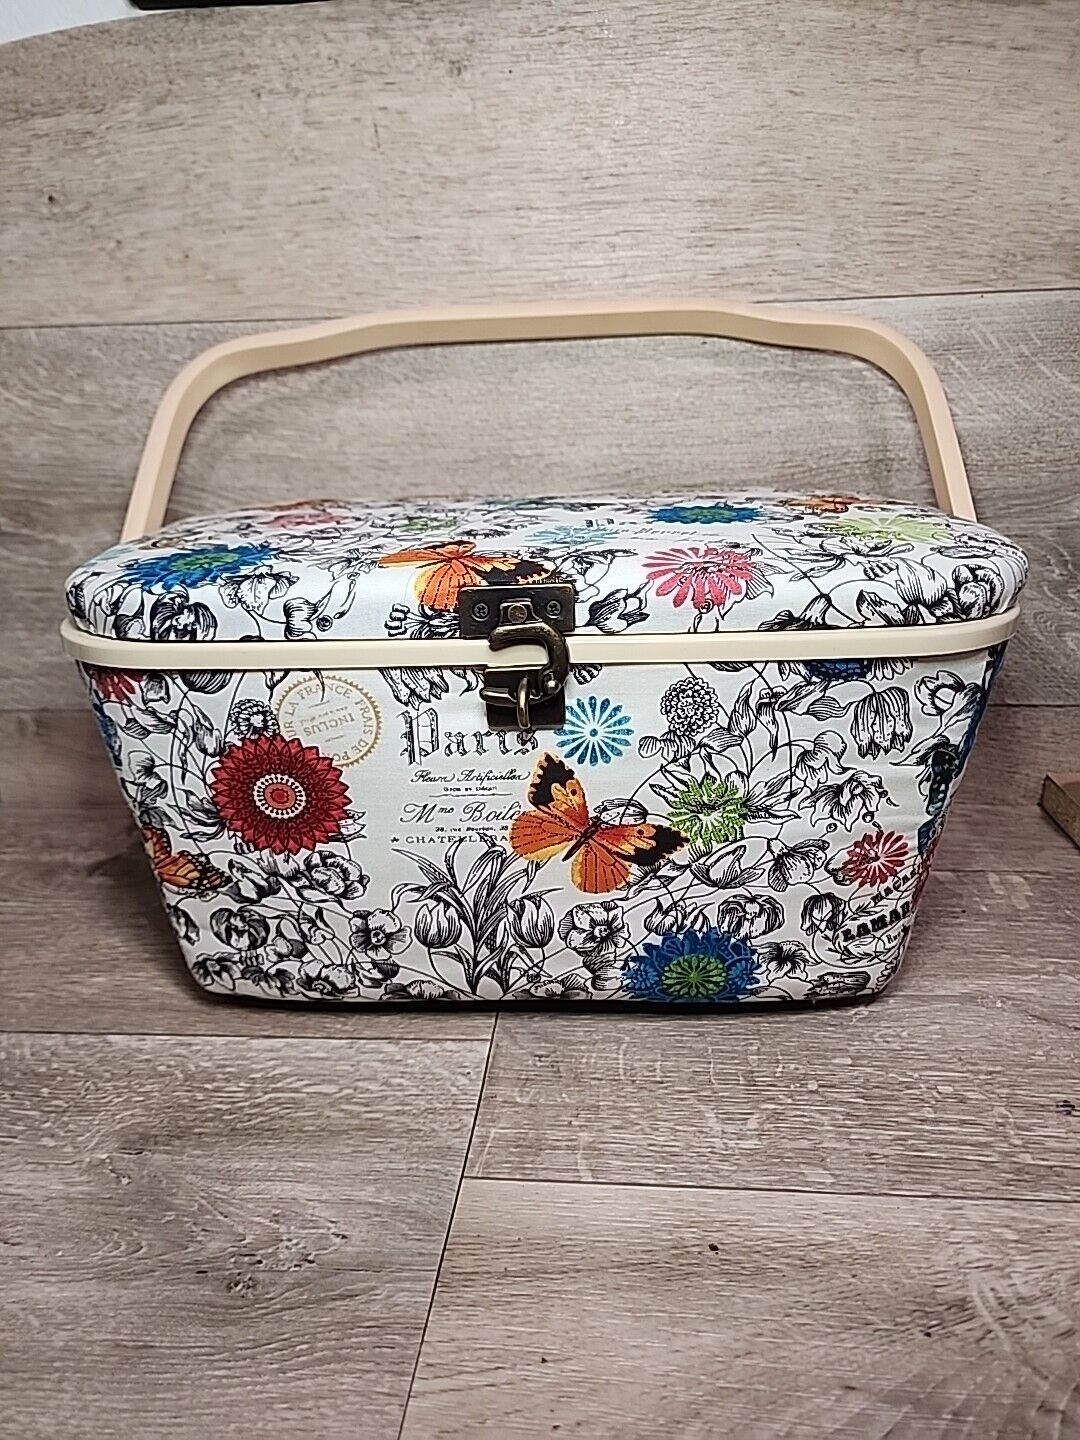 Dritz Large Oval Multicolored Floral Sewing Basket